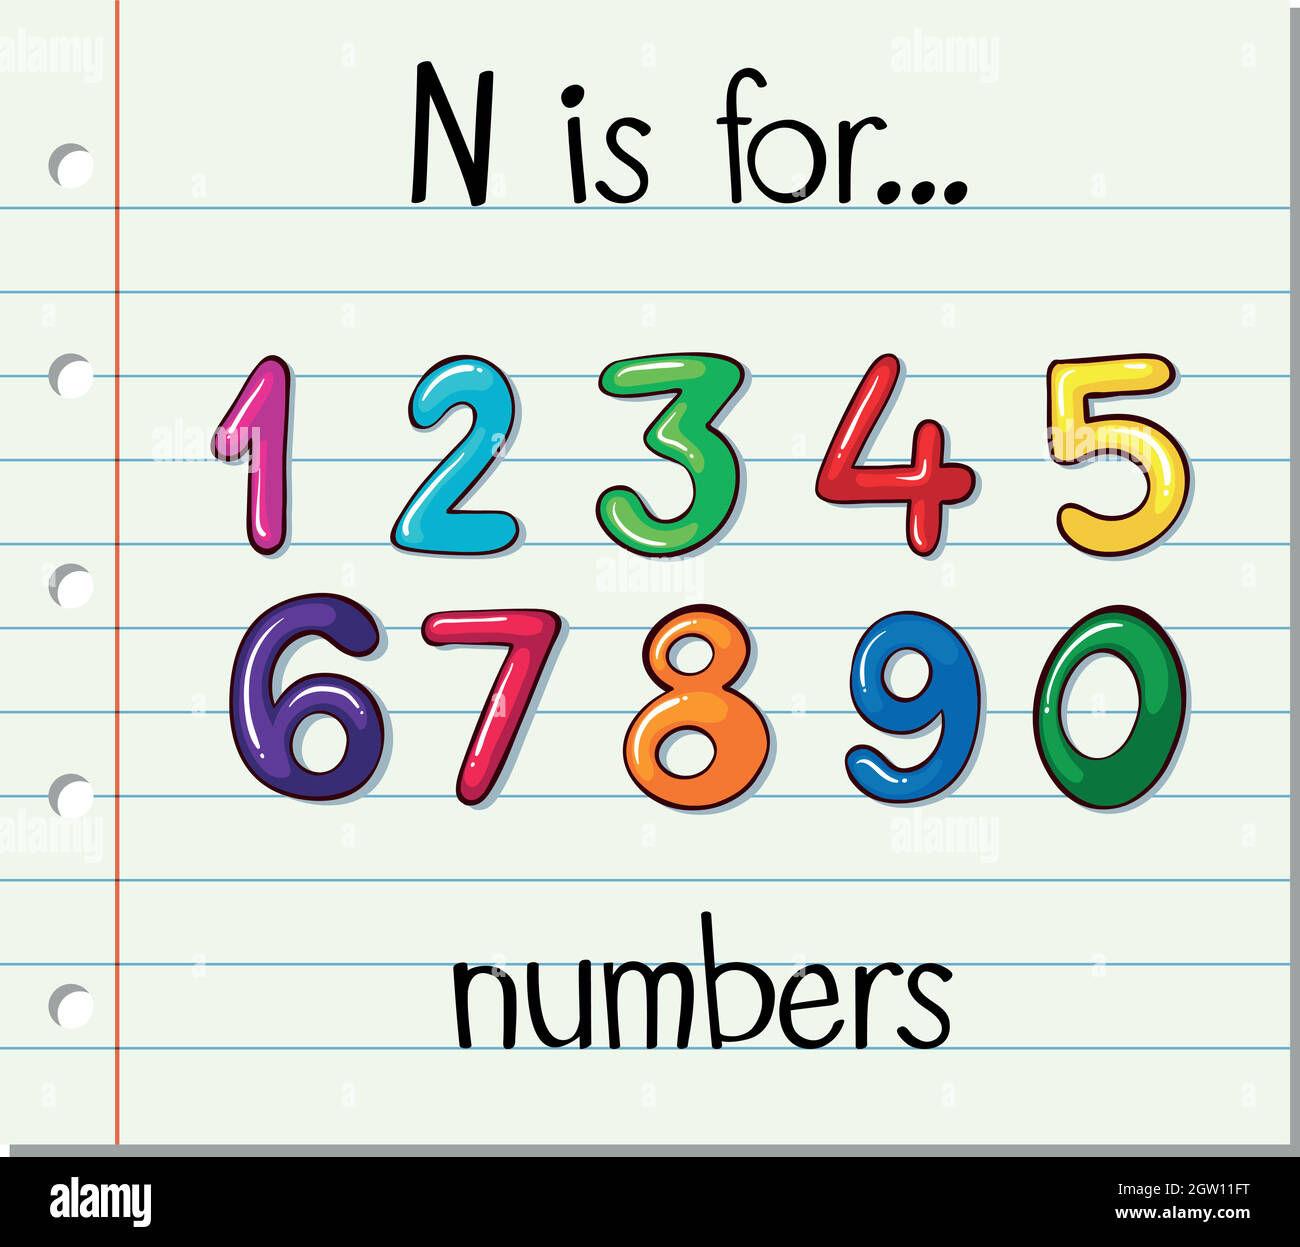 Flashcard letter N is for numbers Stock Vector